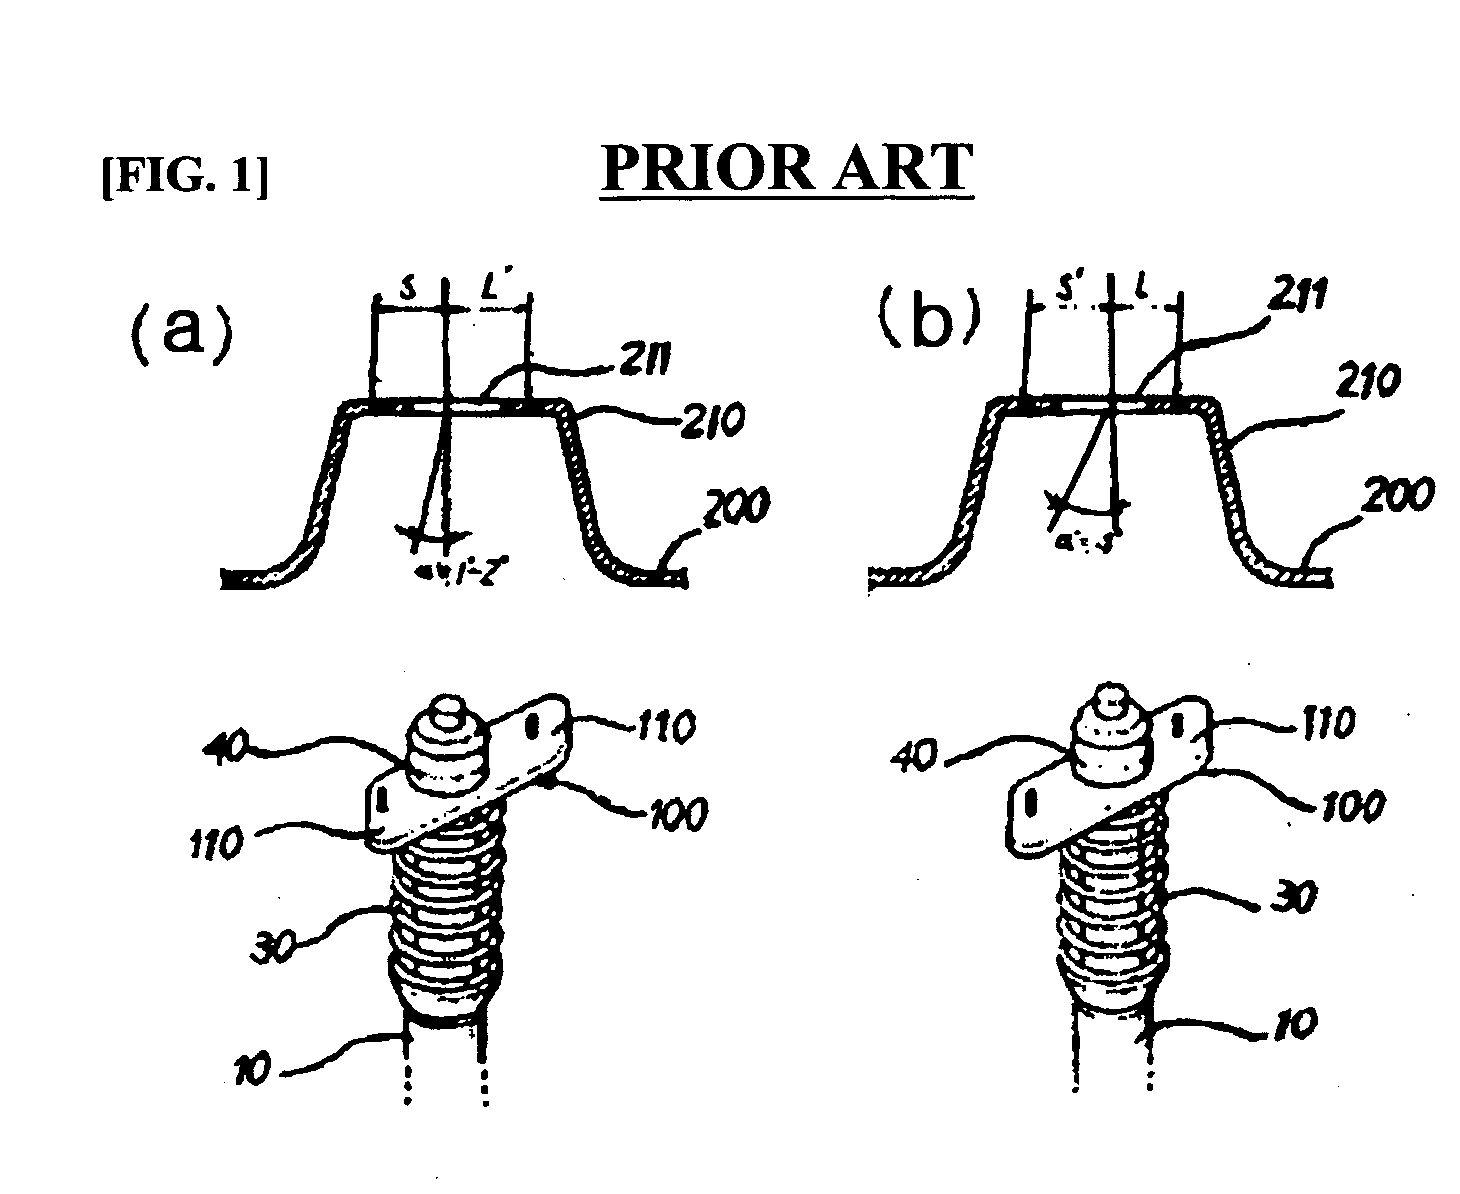 Suspension assembly applicable to both manual and power steering systems